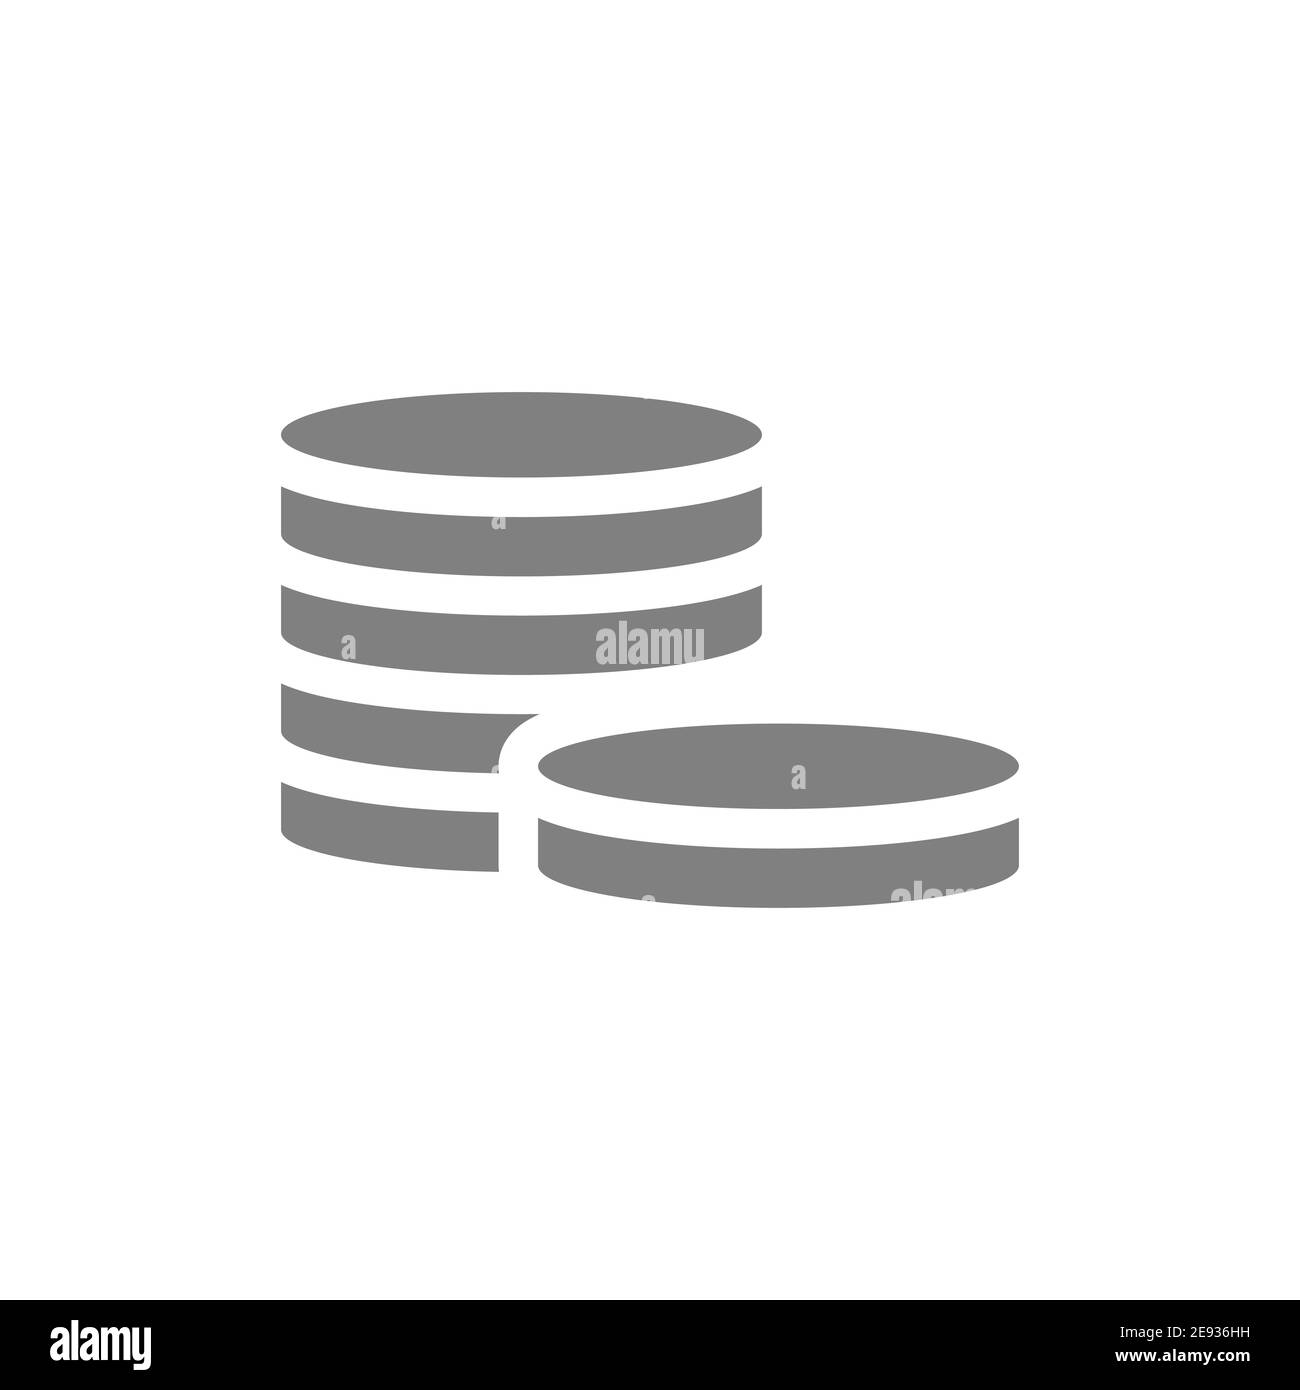 Coin stack icon. Money dollar symbol. Busines pay concept. Vector isolated on white Stock Vector